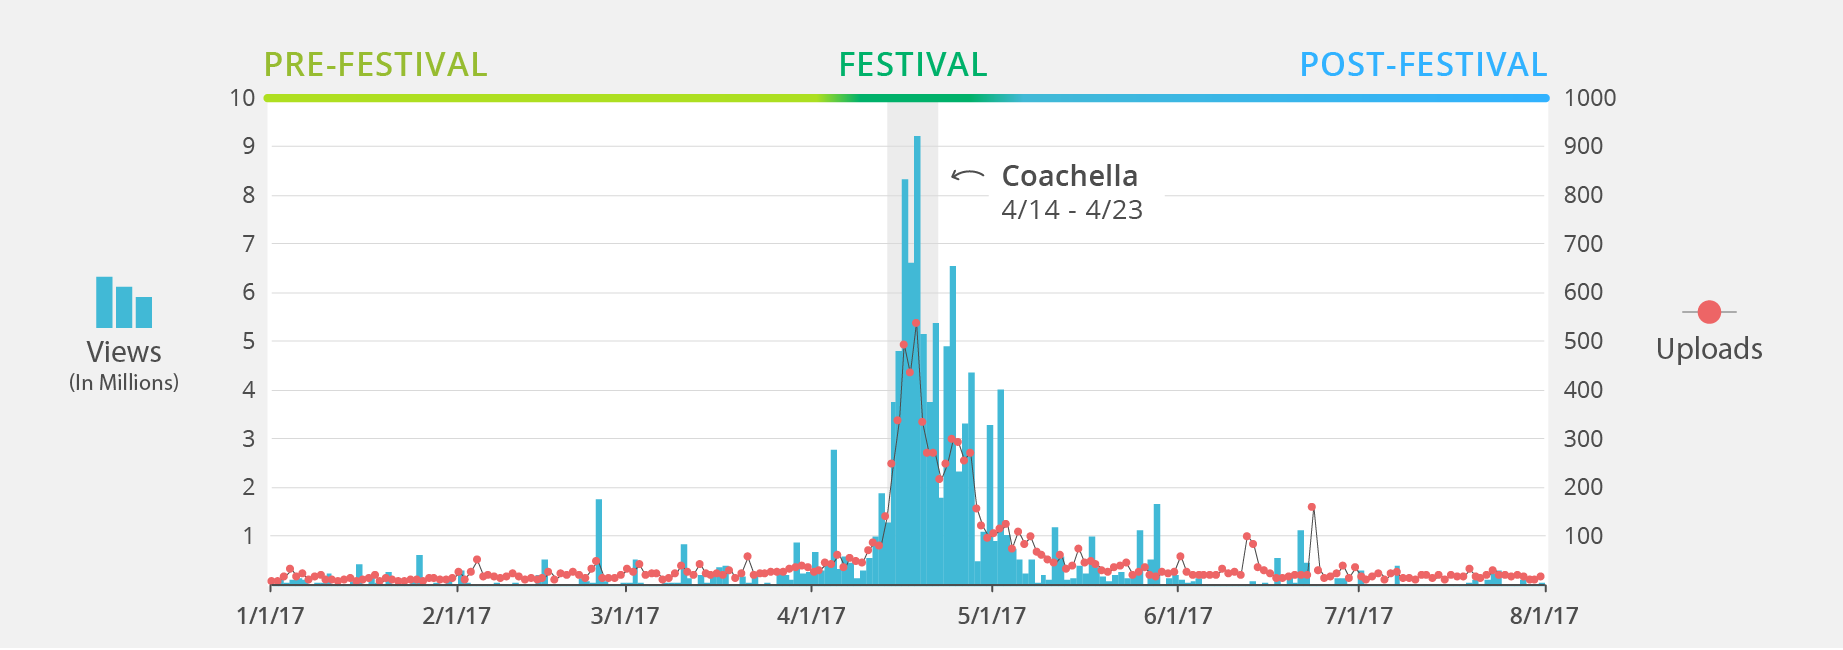 Bell curve of views and uploads for Coachella content over the course of 2017